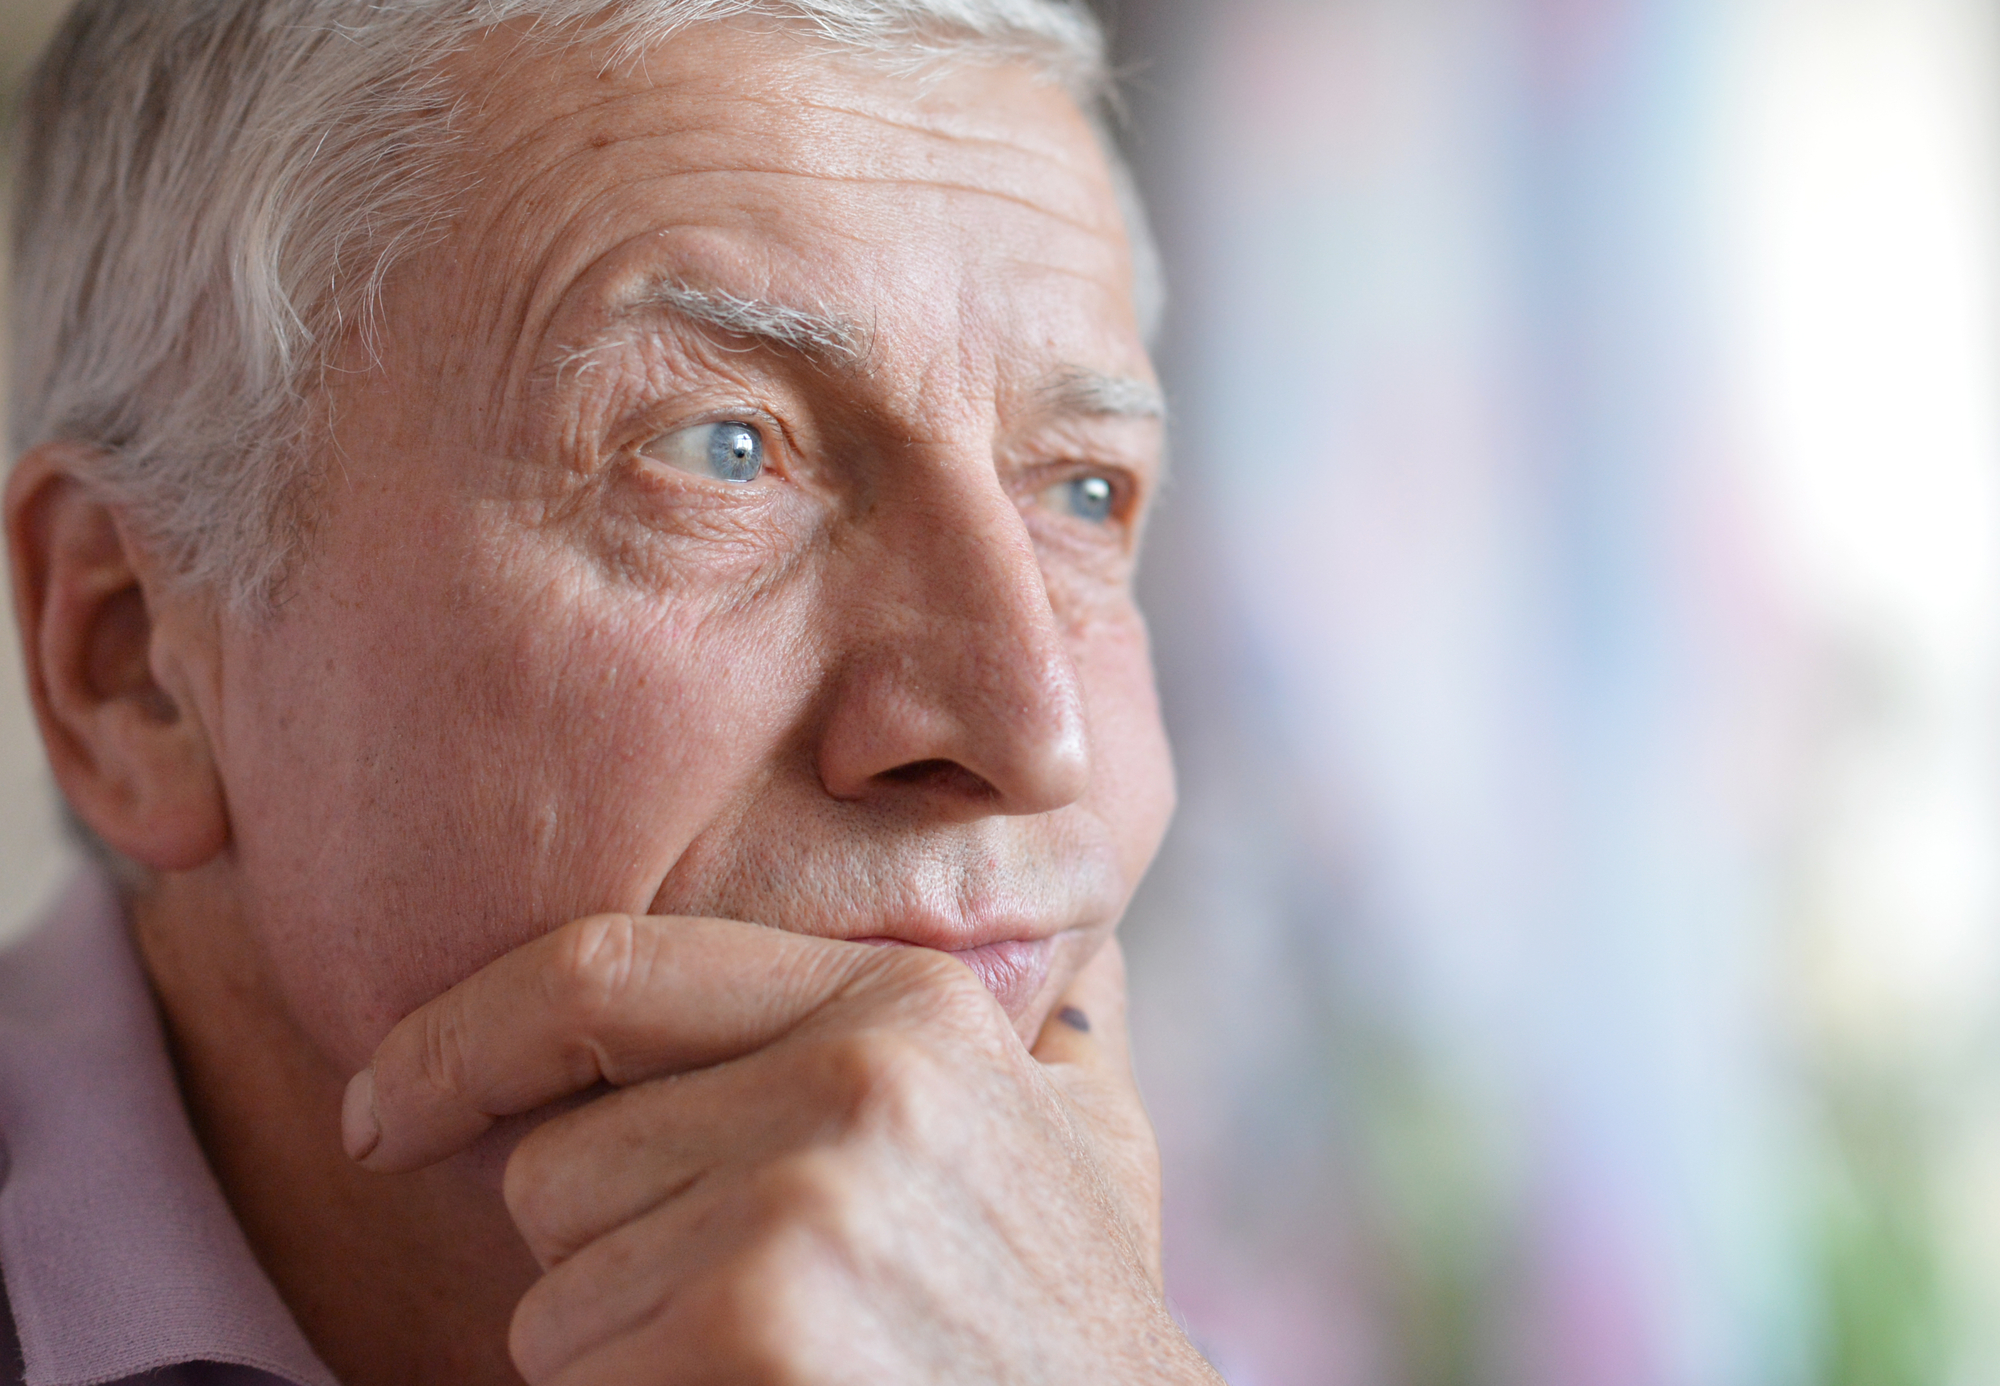 Mental Health for Seniors: How to Identify Problems and Get Proper Care